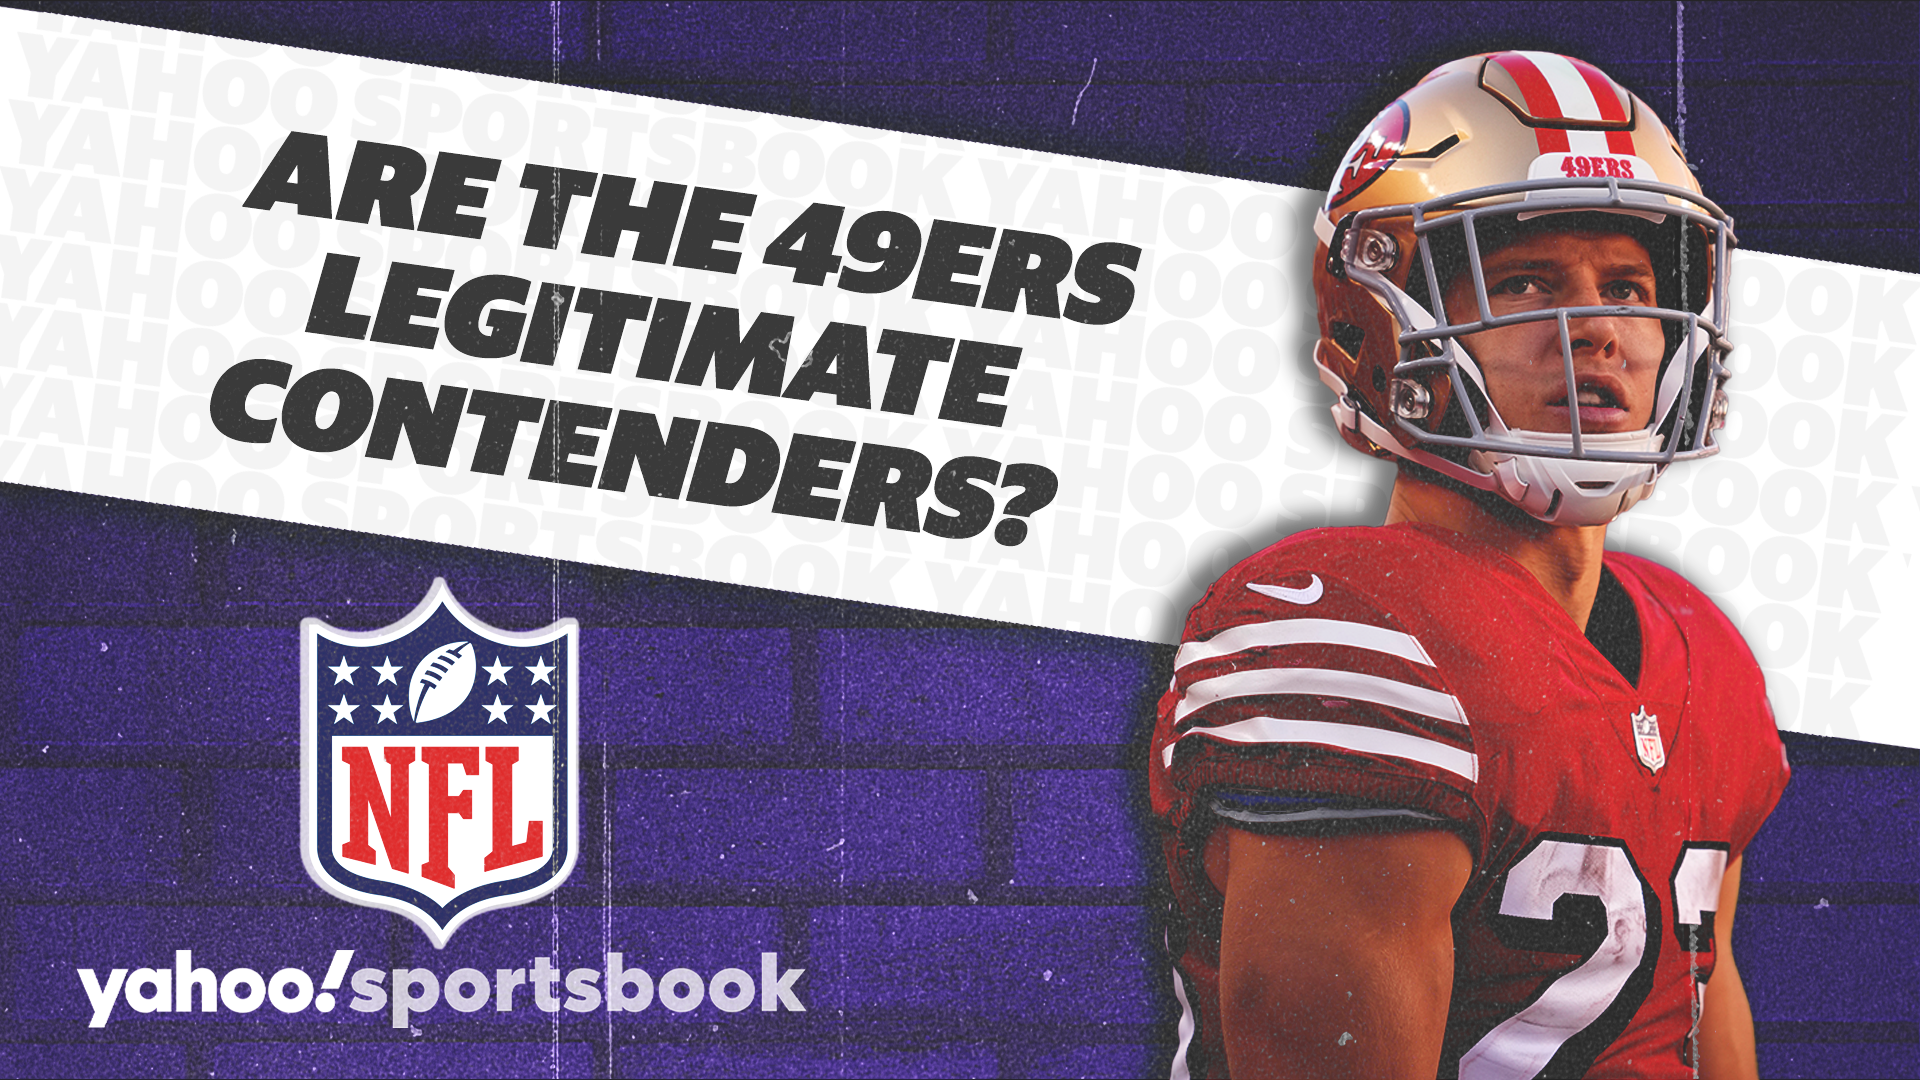 Betting: Are 49ers legit contenders?